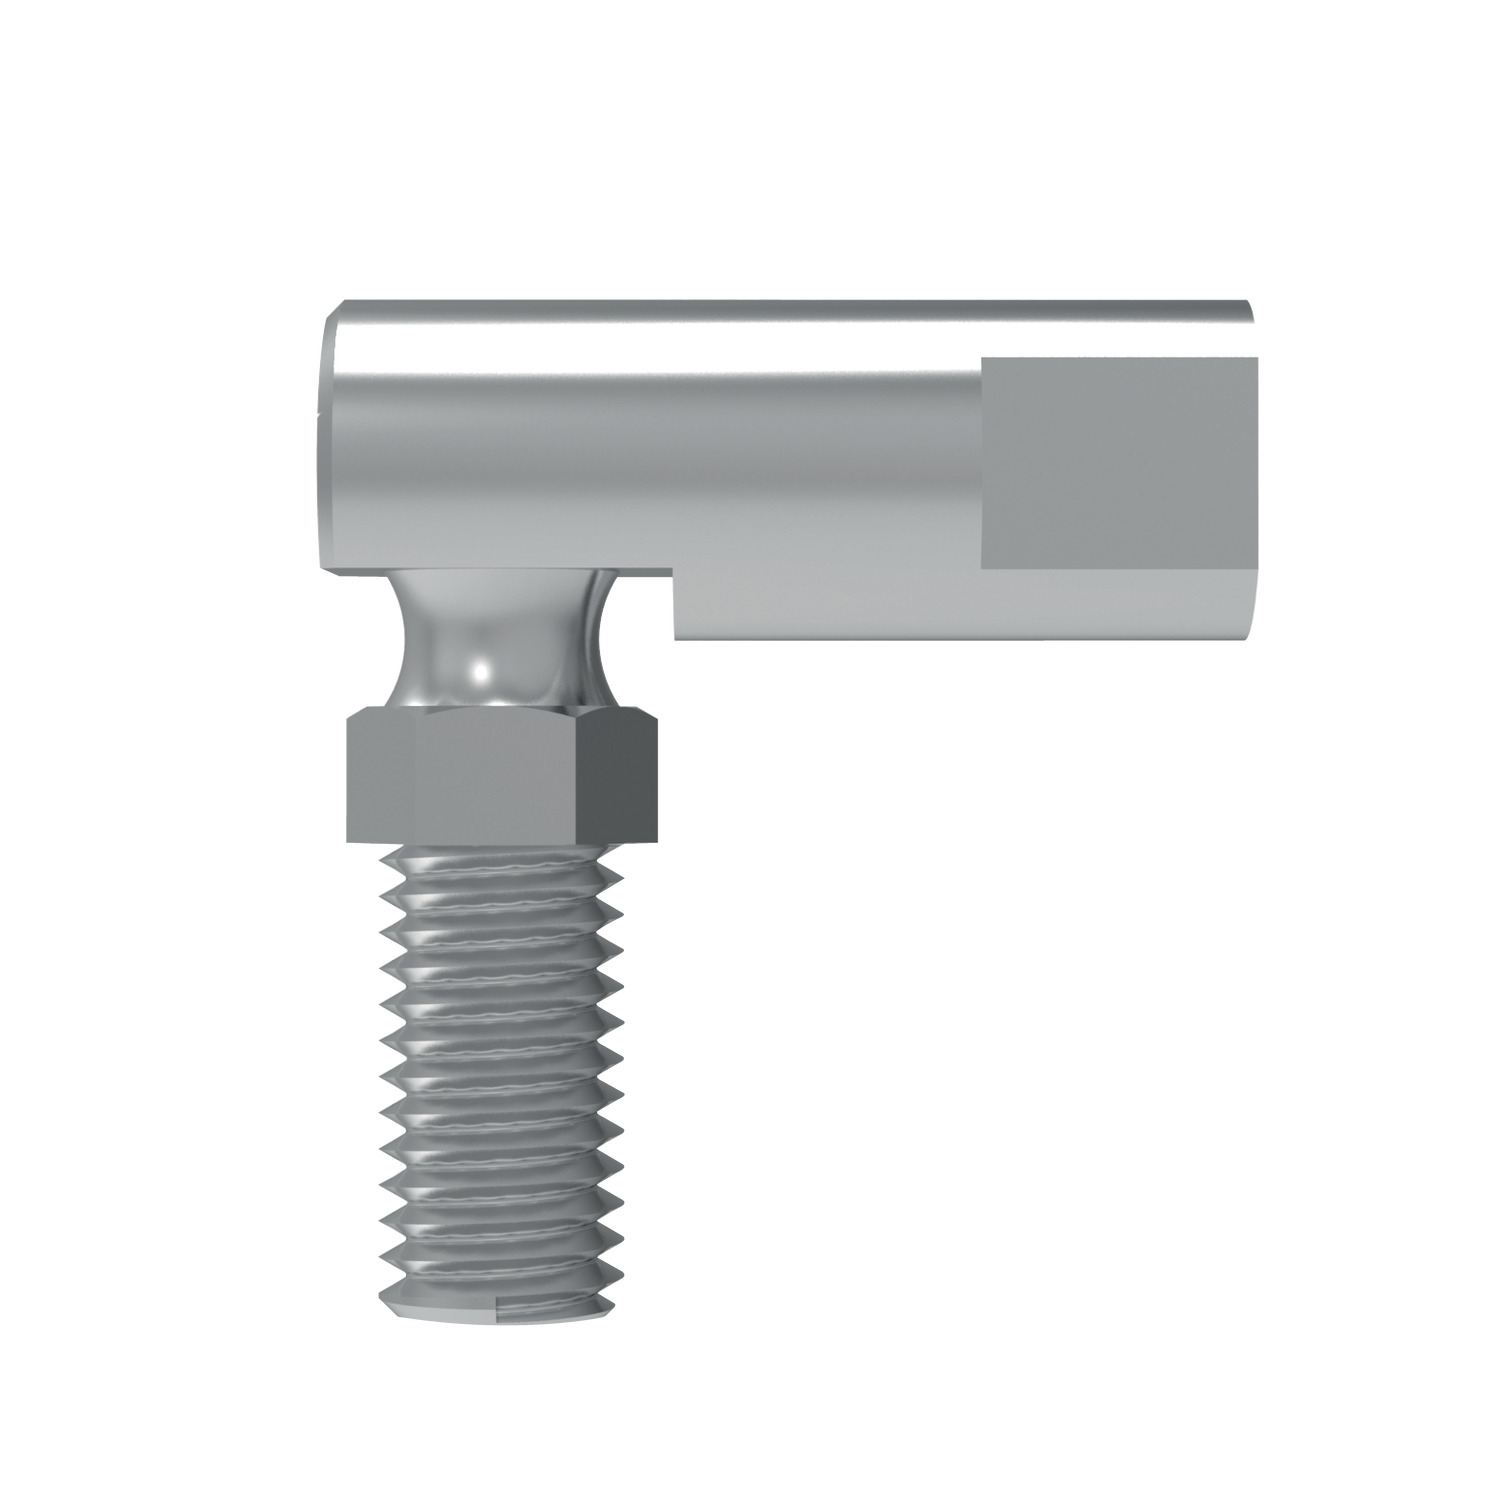 R3532 Stainless DMG Ball and Socket Joint